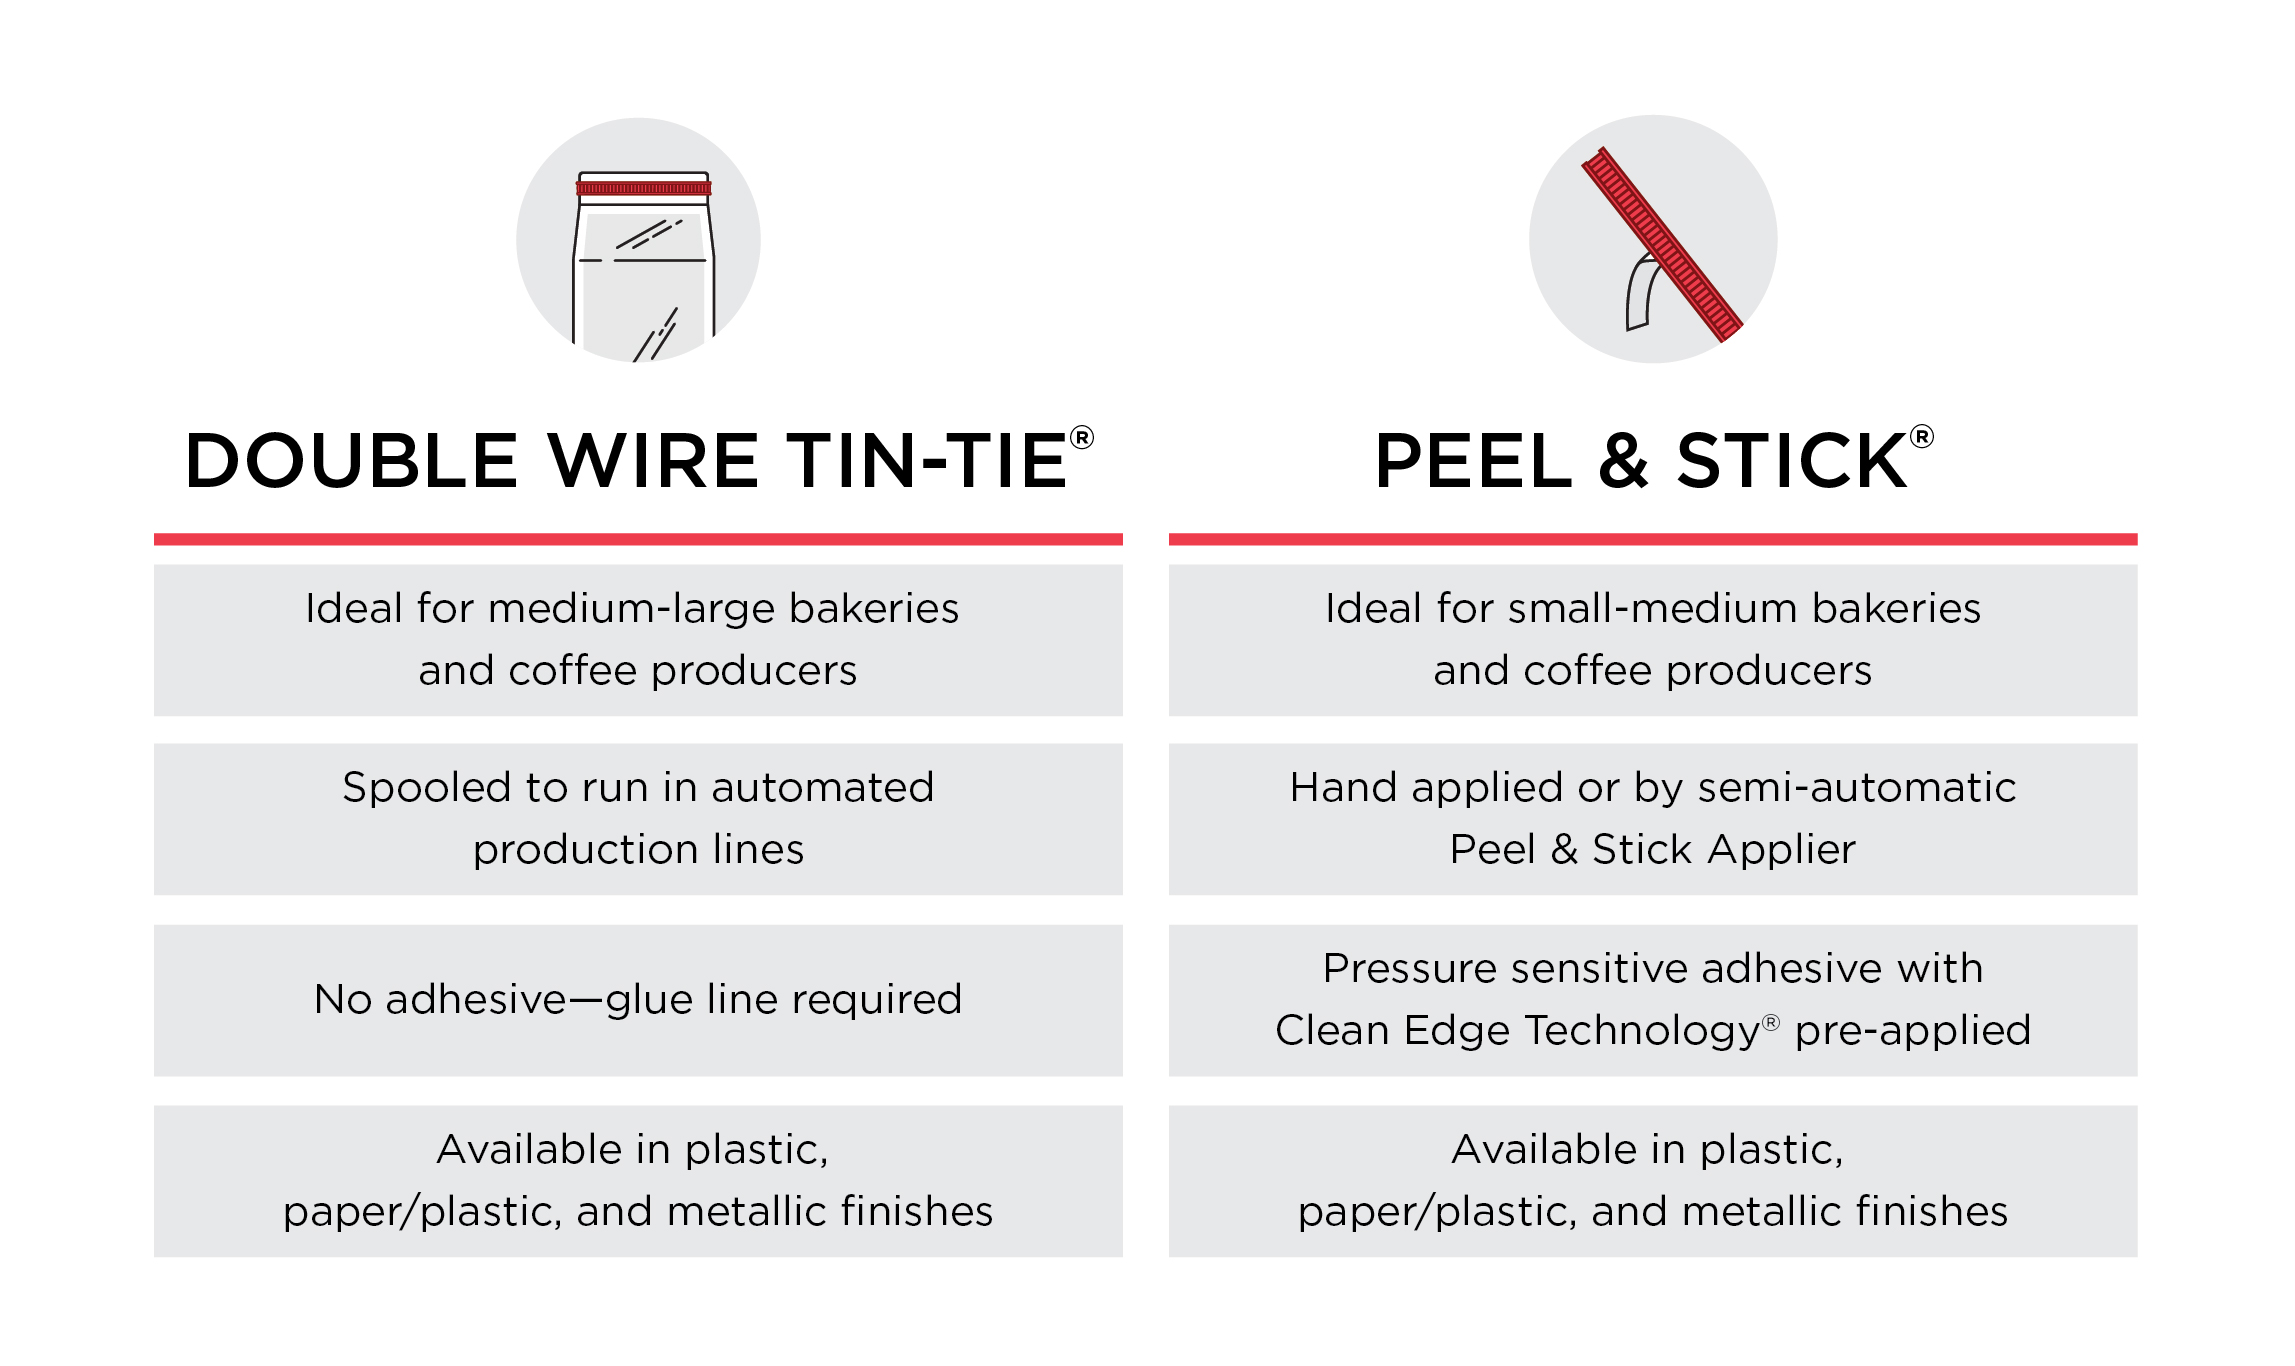 infographic comparing traits of Double Wire Tin-Tie and Peel & Stick bag closures